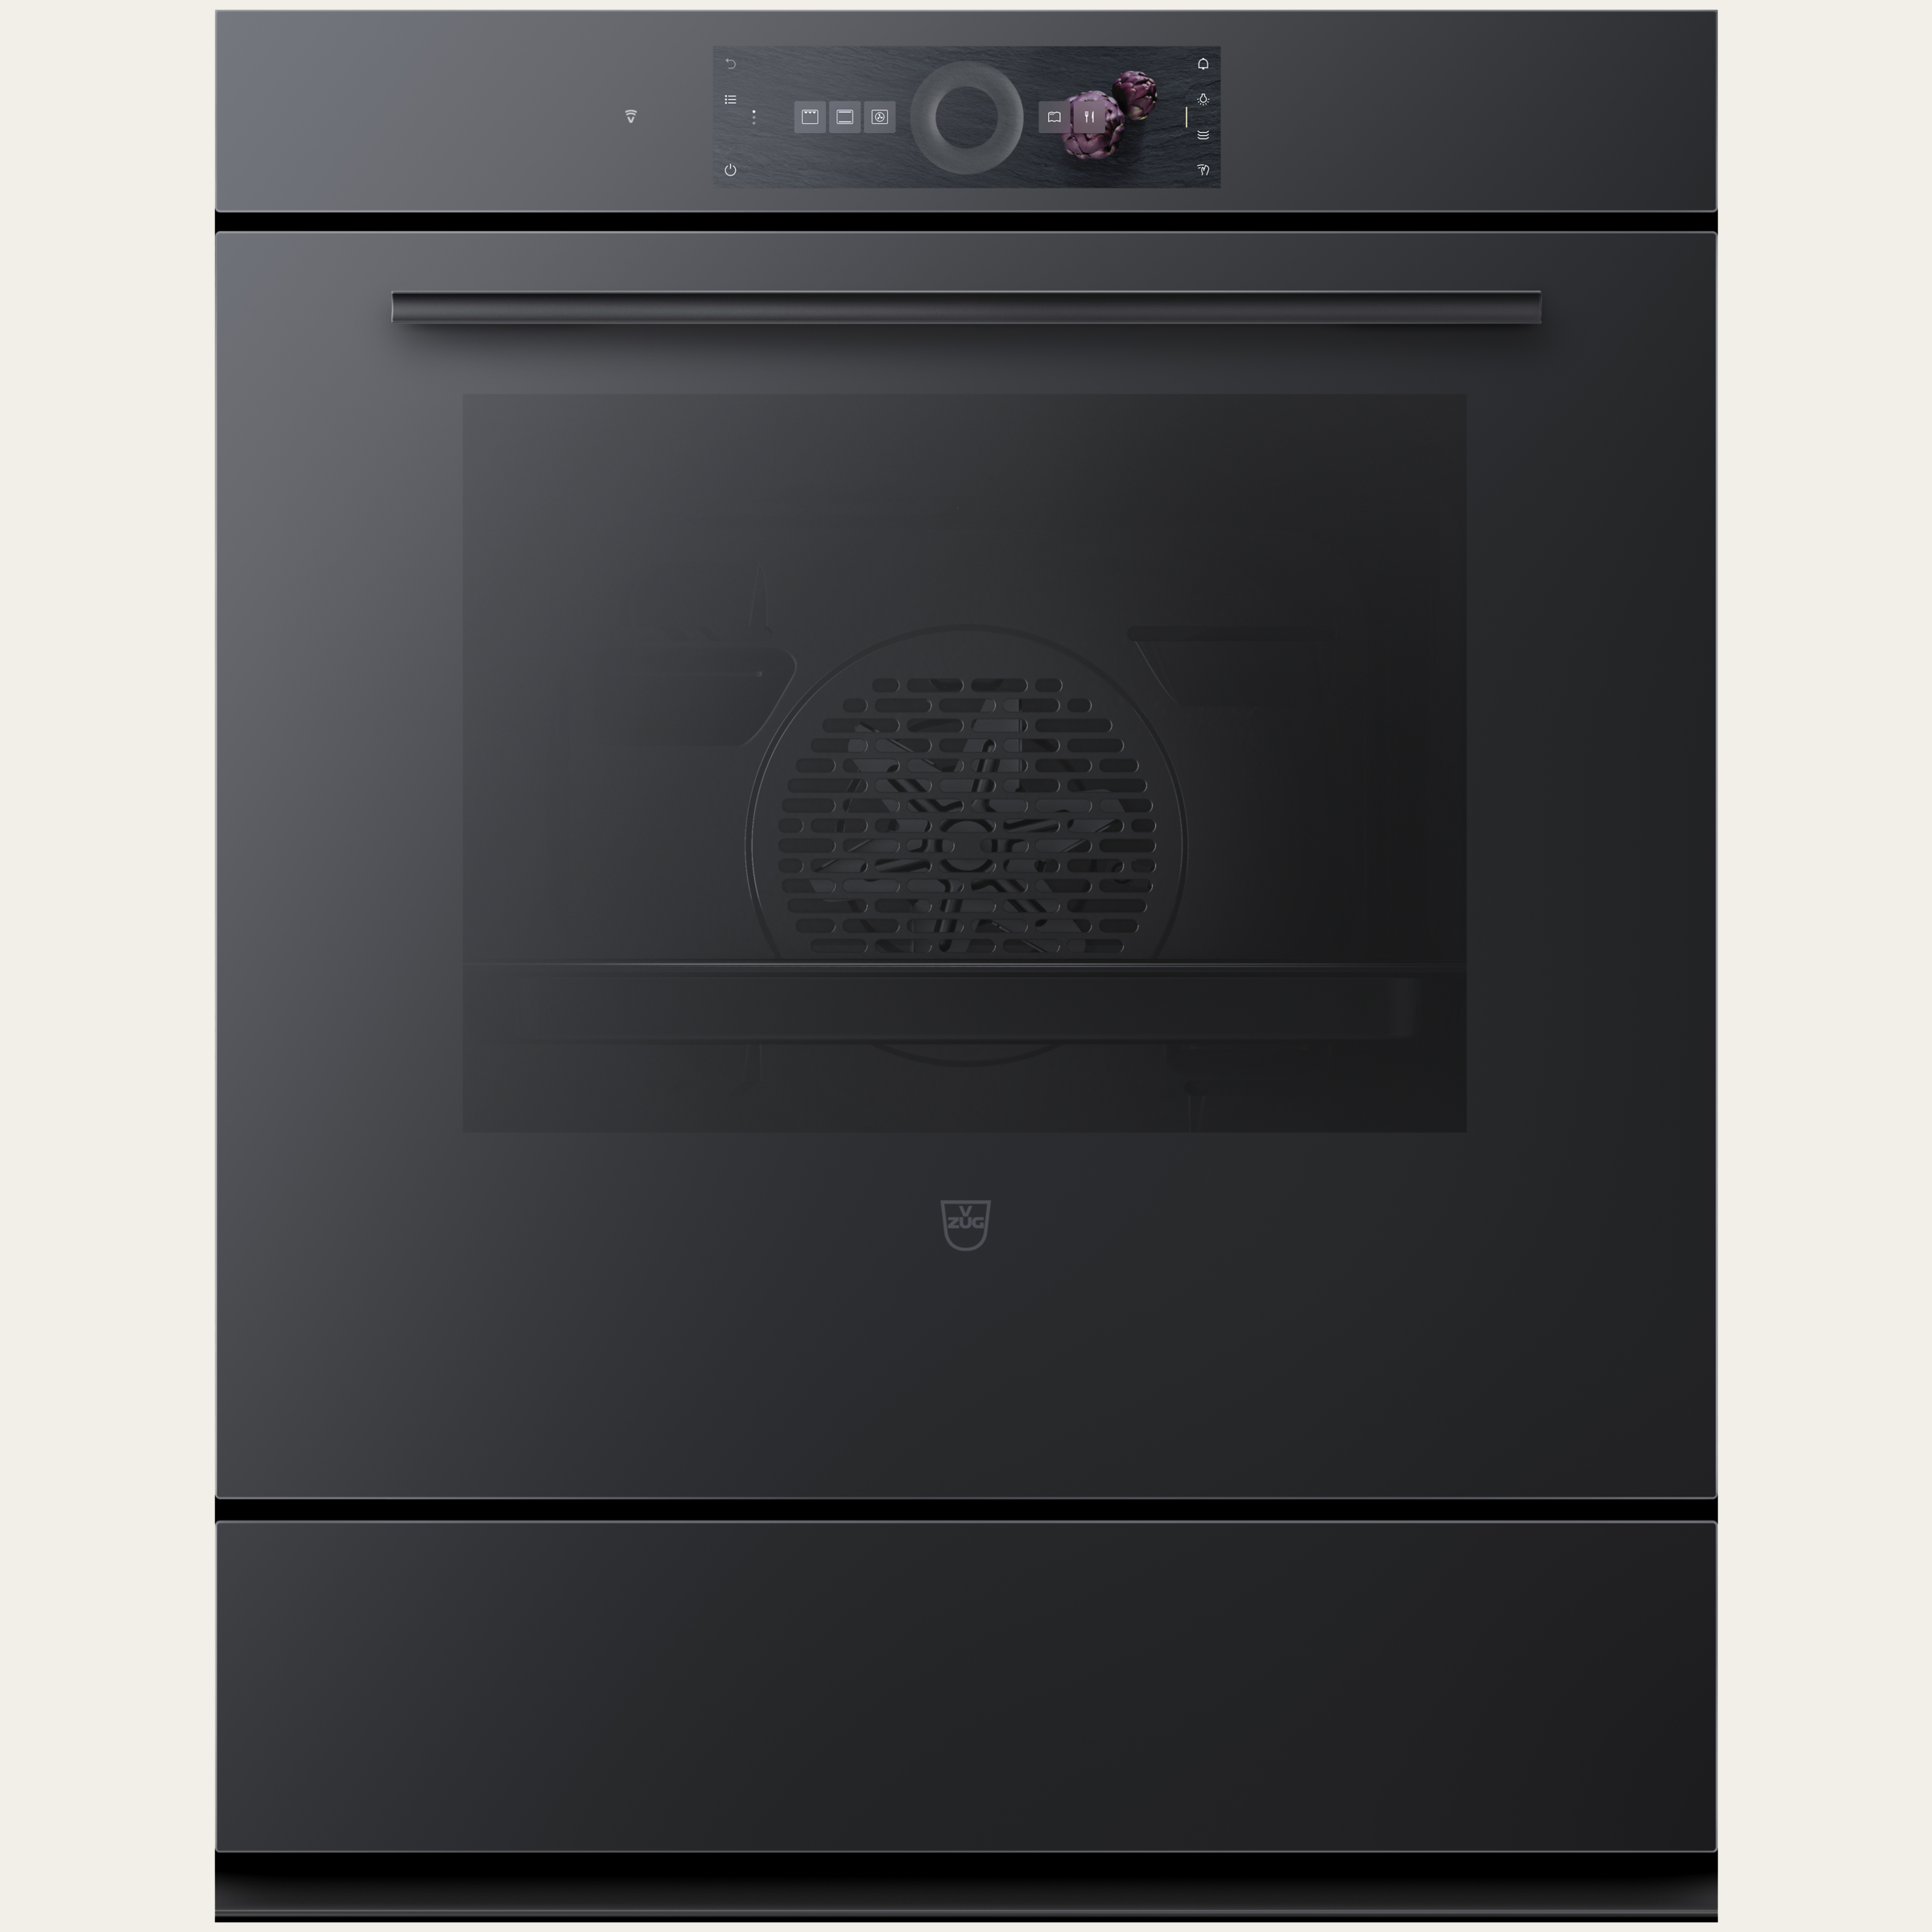 V-ZUG Oven Combair V6000 76P, Standard width: 60 cm,Standard height: 76.2 cm, Black mirror glass, Touchscreen with CircleSlider, V-ZUG-Home, Heatable appliance drawer, Pyrolytic self-cleaning